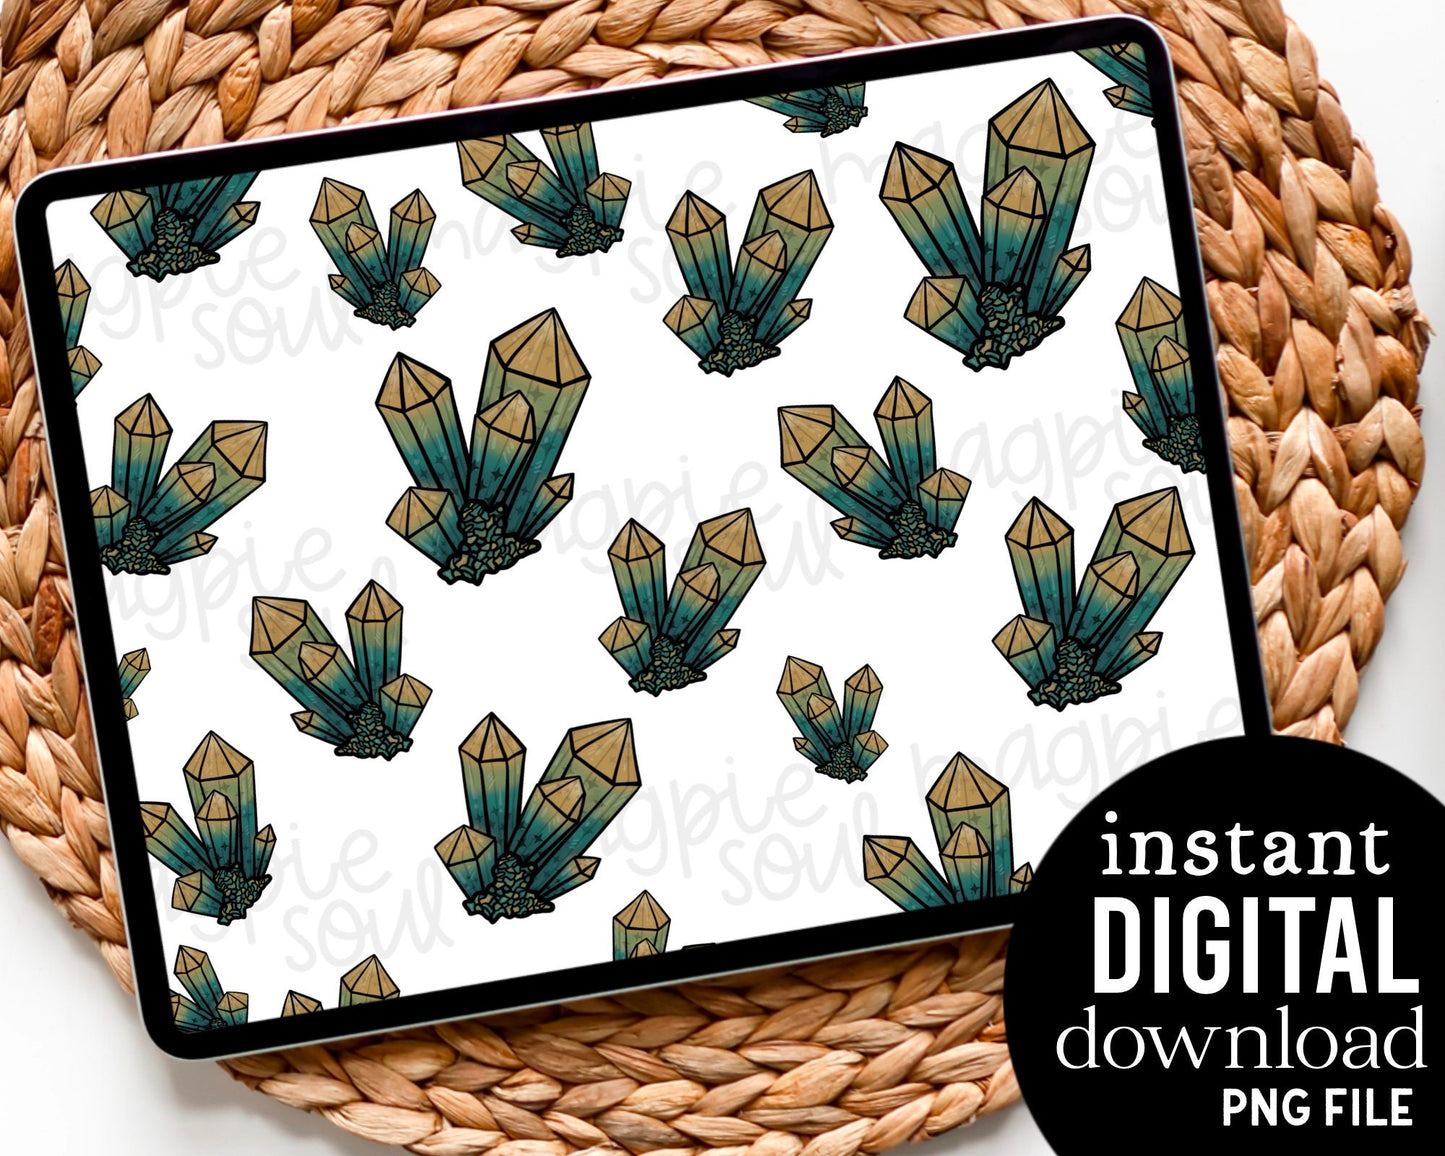 Ombre Crystals - Digital Pattern Paper